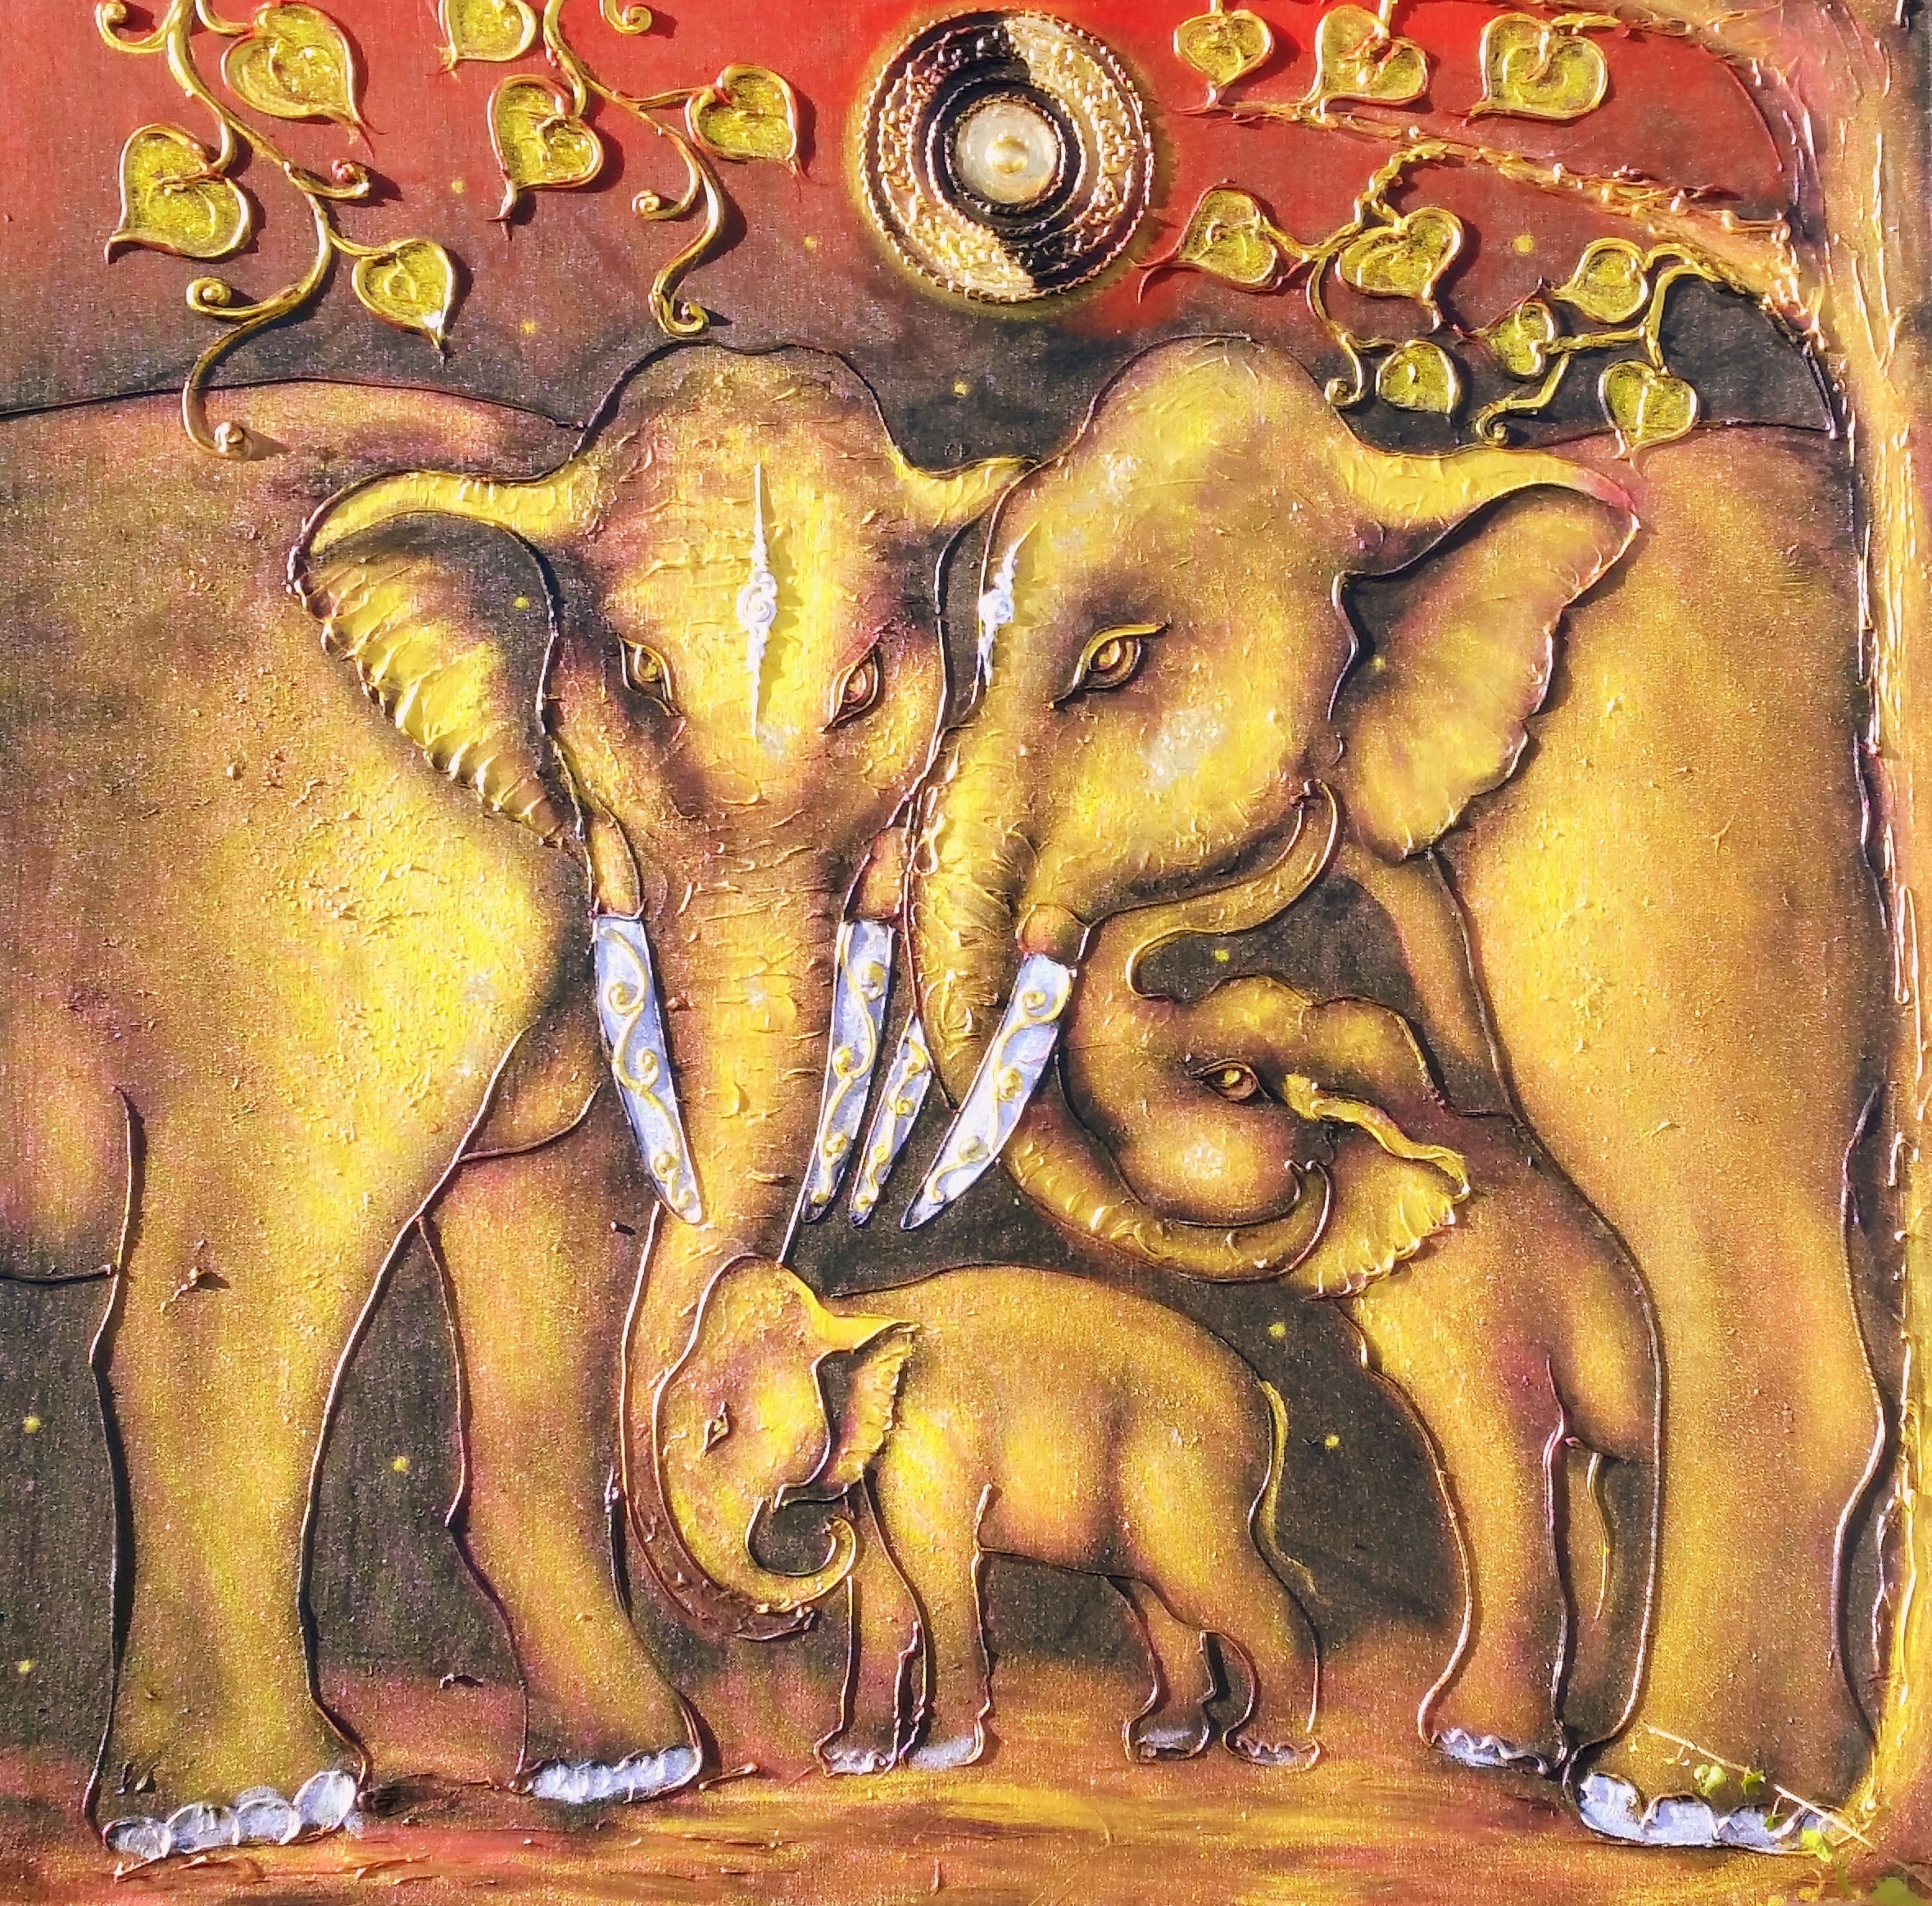 Elephant, Pachyderm, Elephant Family, painted image, gold colored